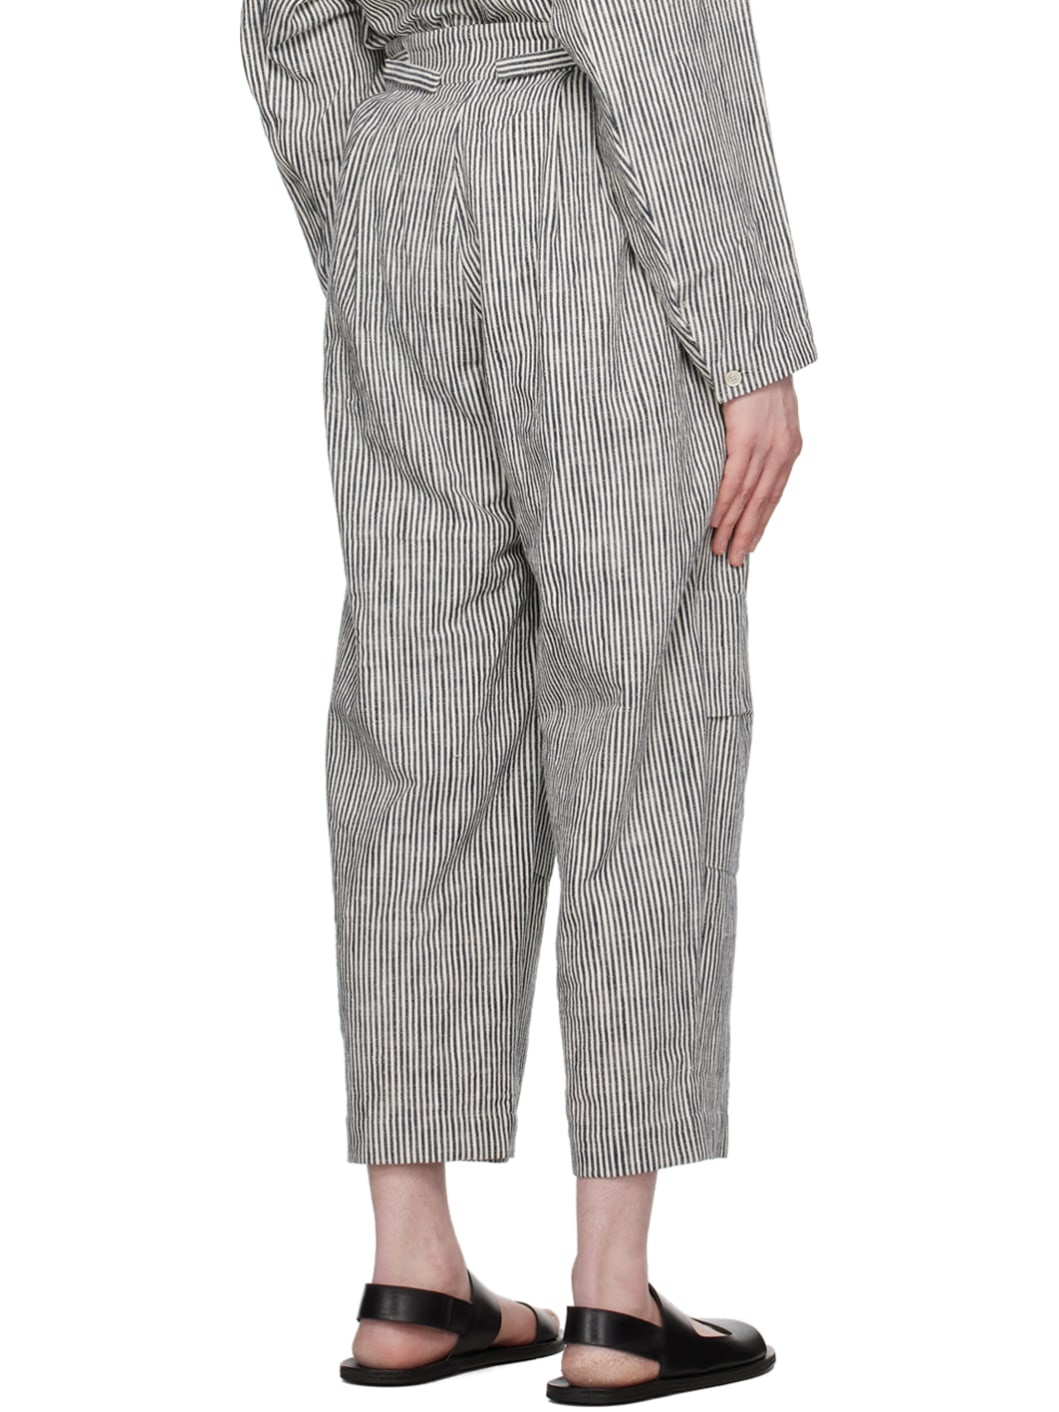 Navy & OFf-White 'The Fisherman' Trousers - 3